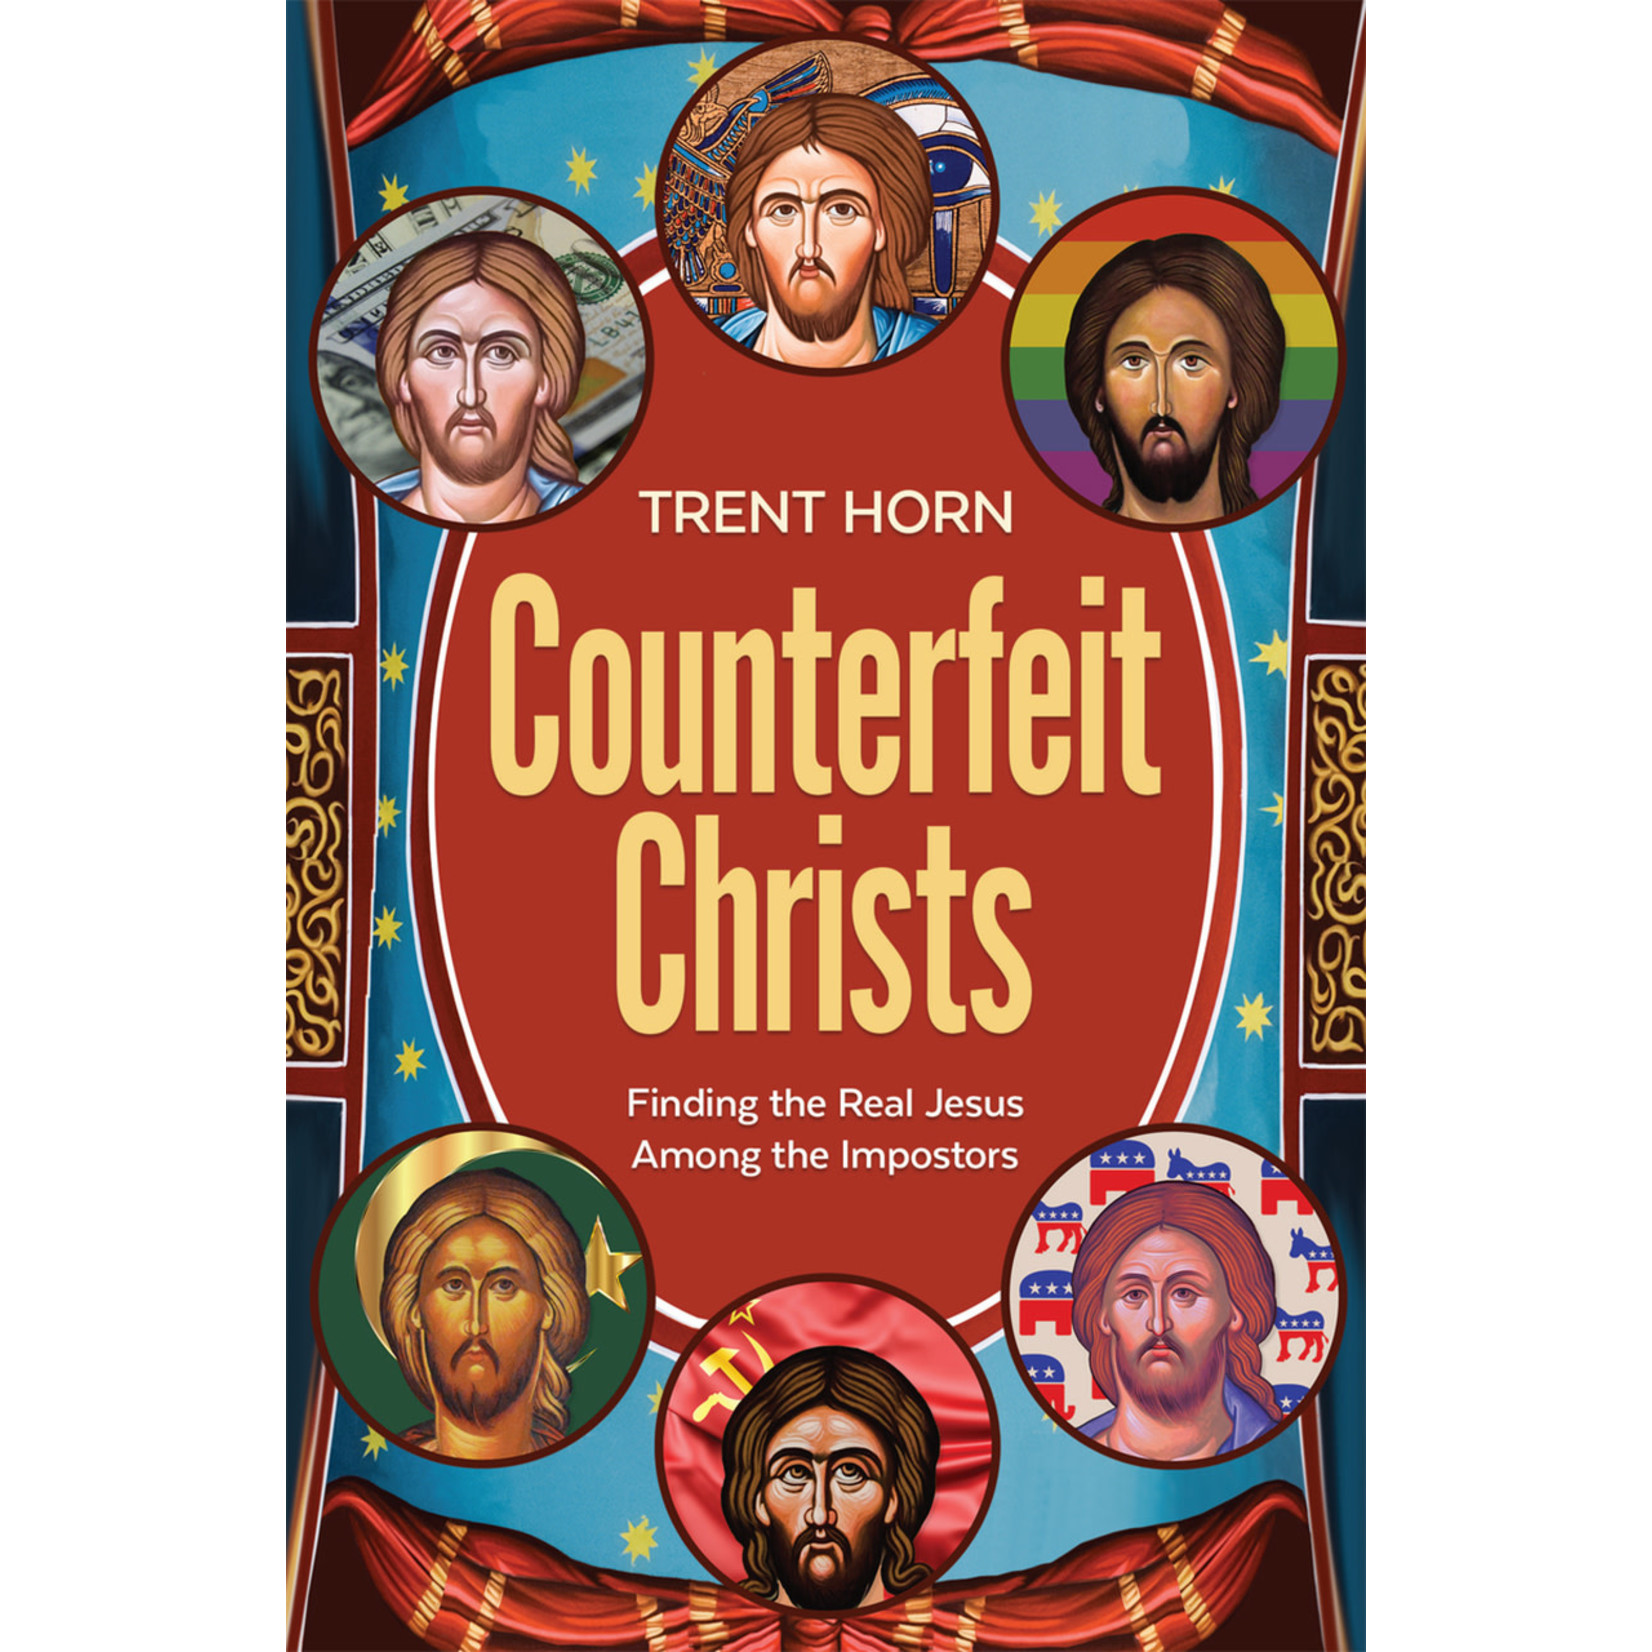 Counterfeit Christs